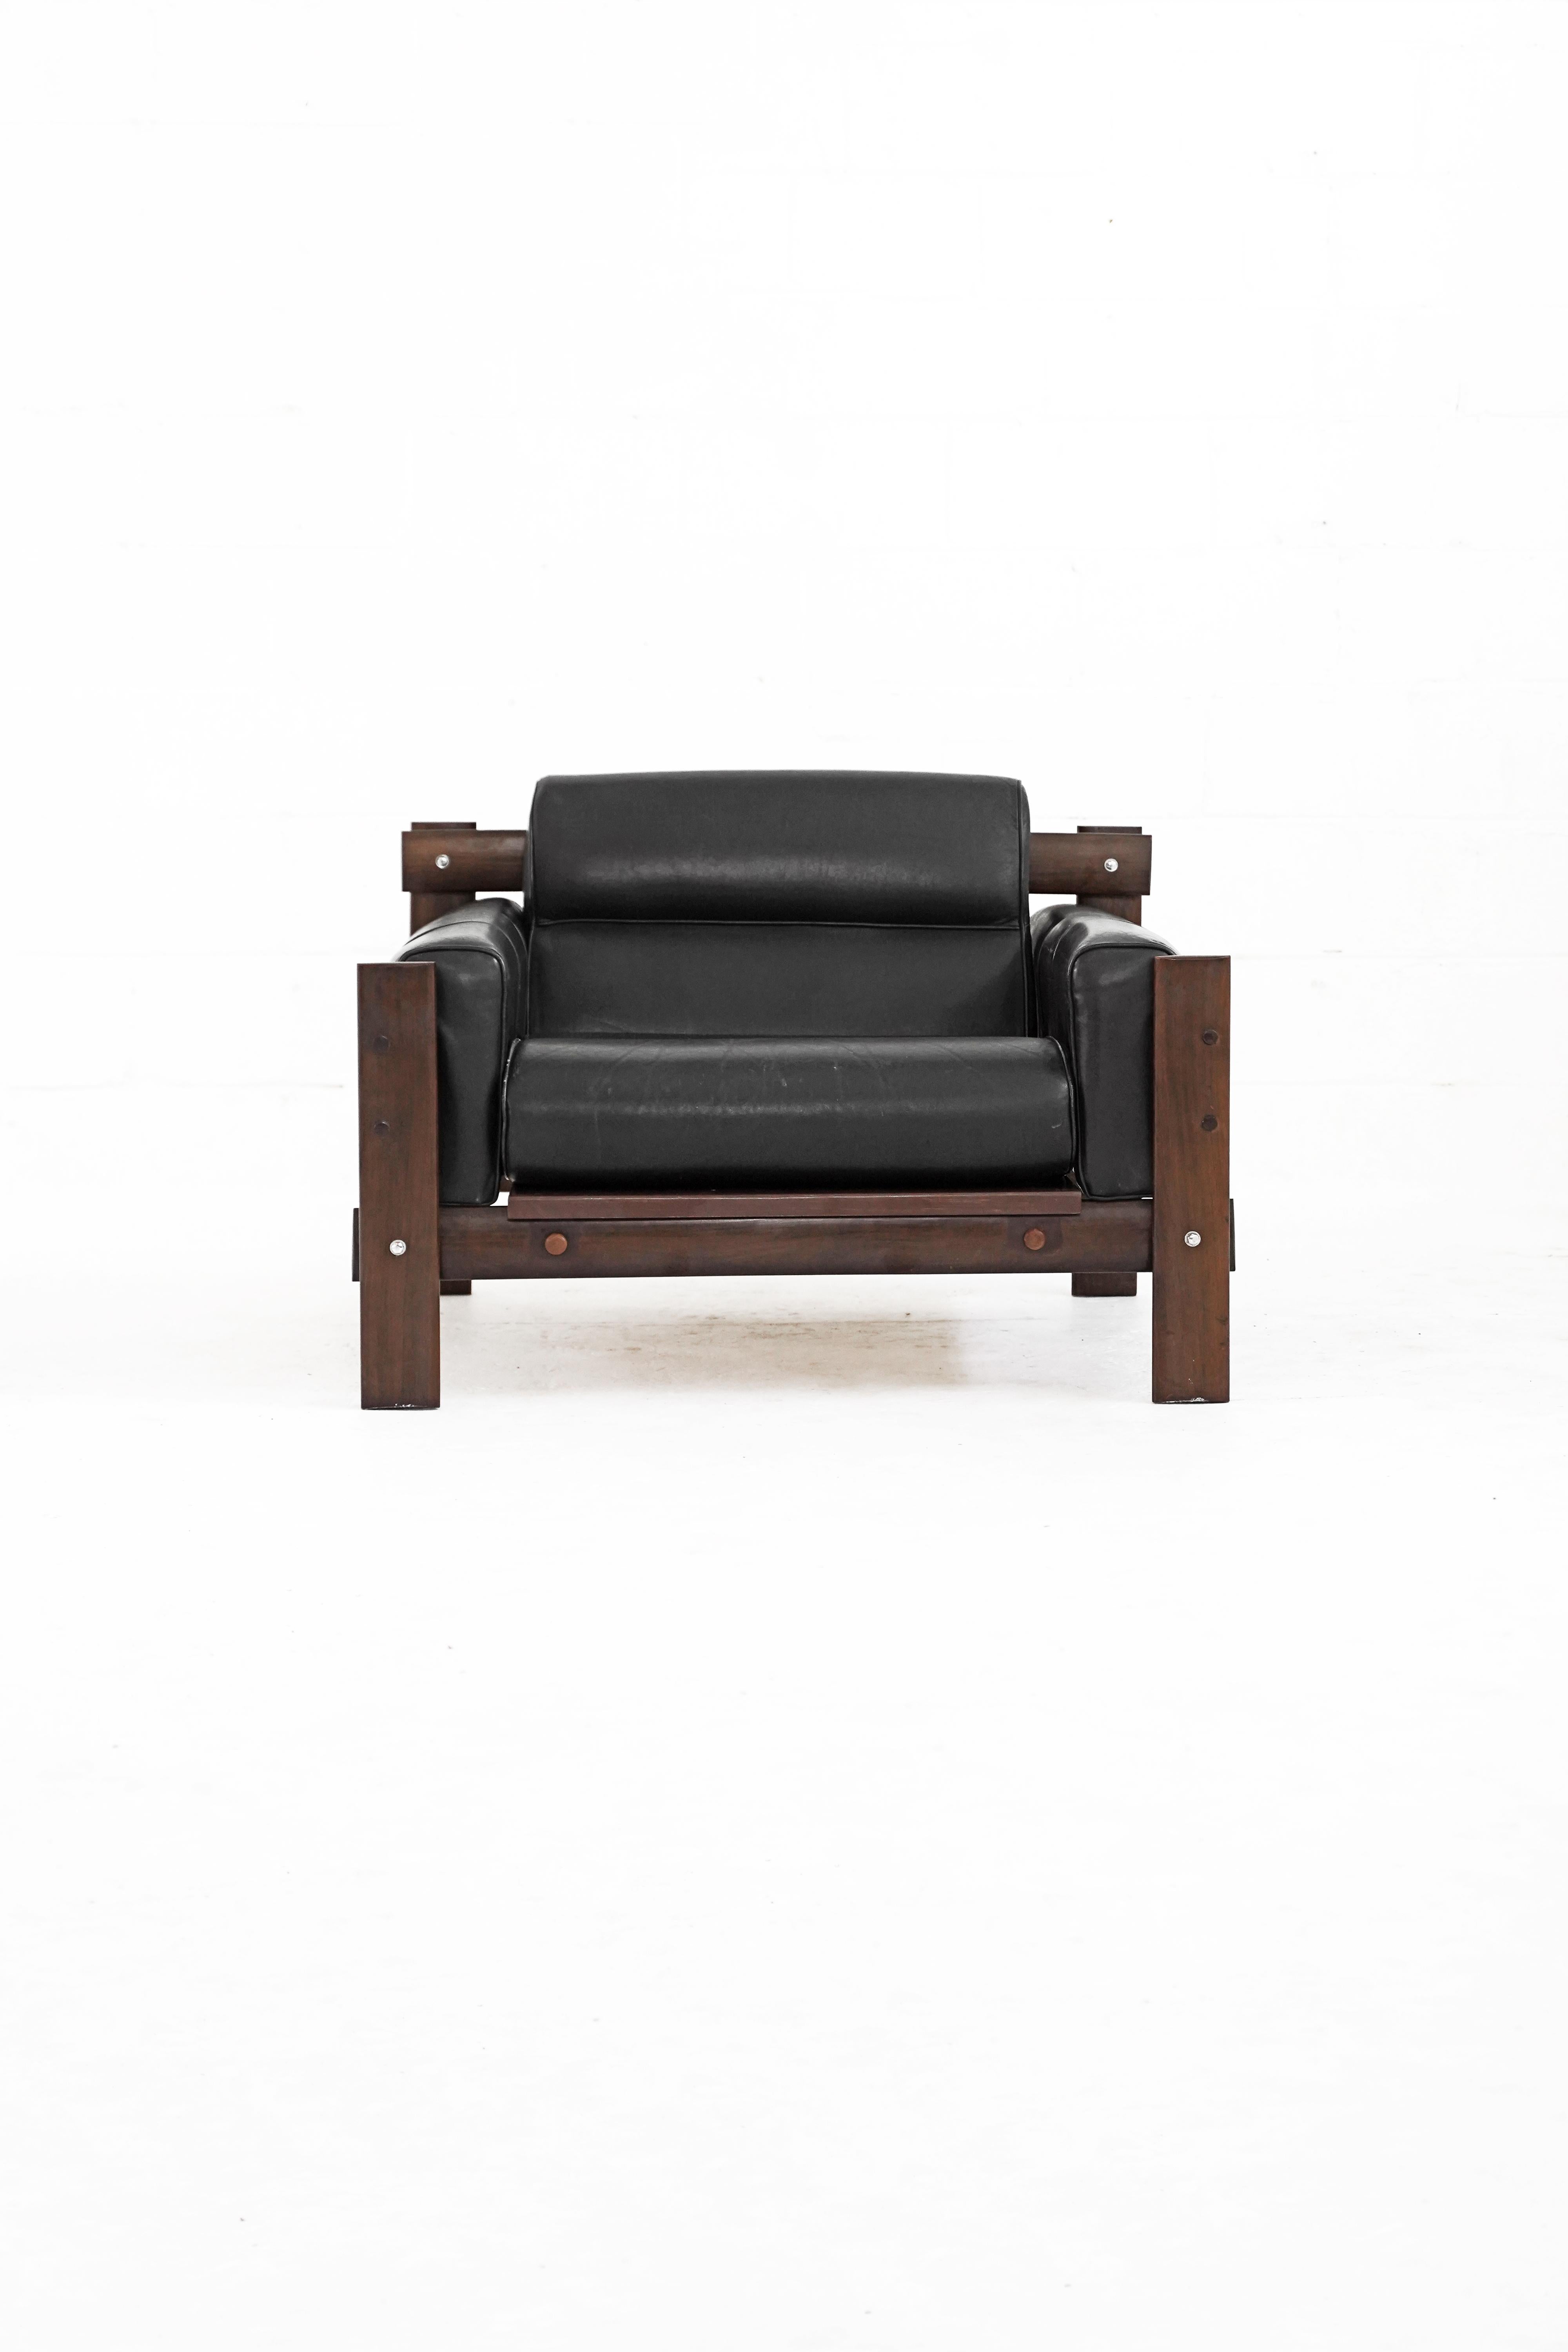 percival lafer lounge chair